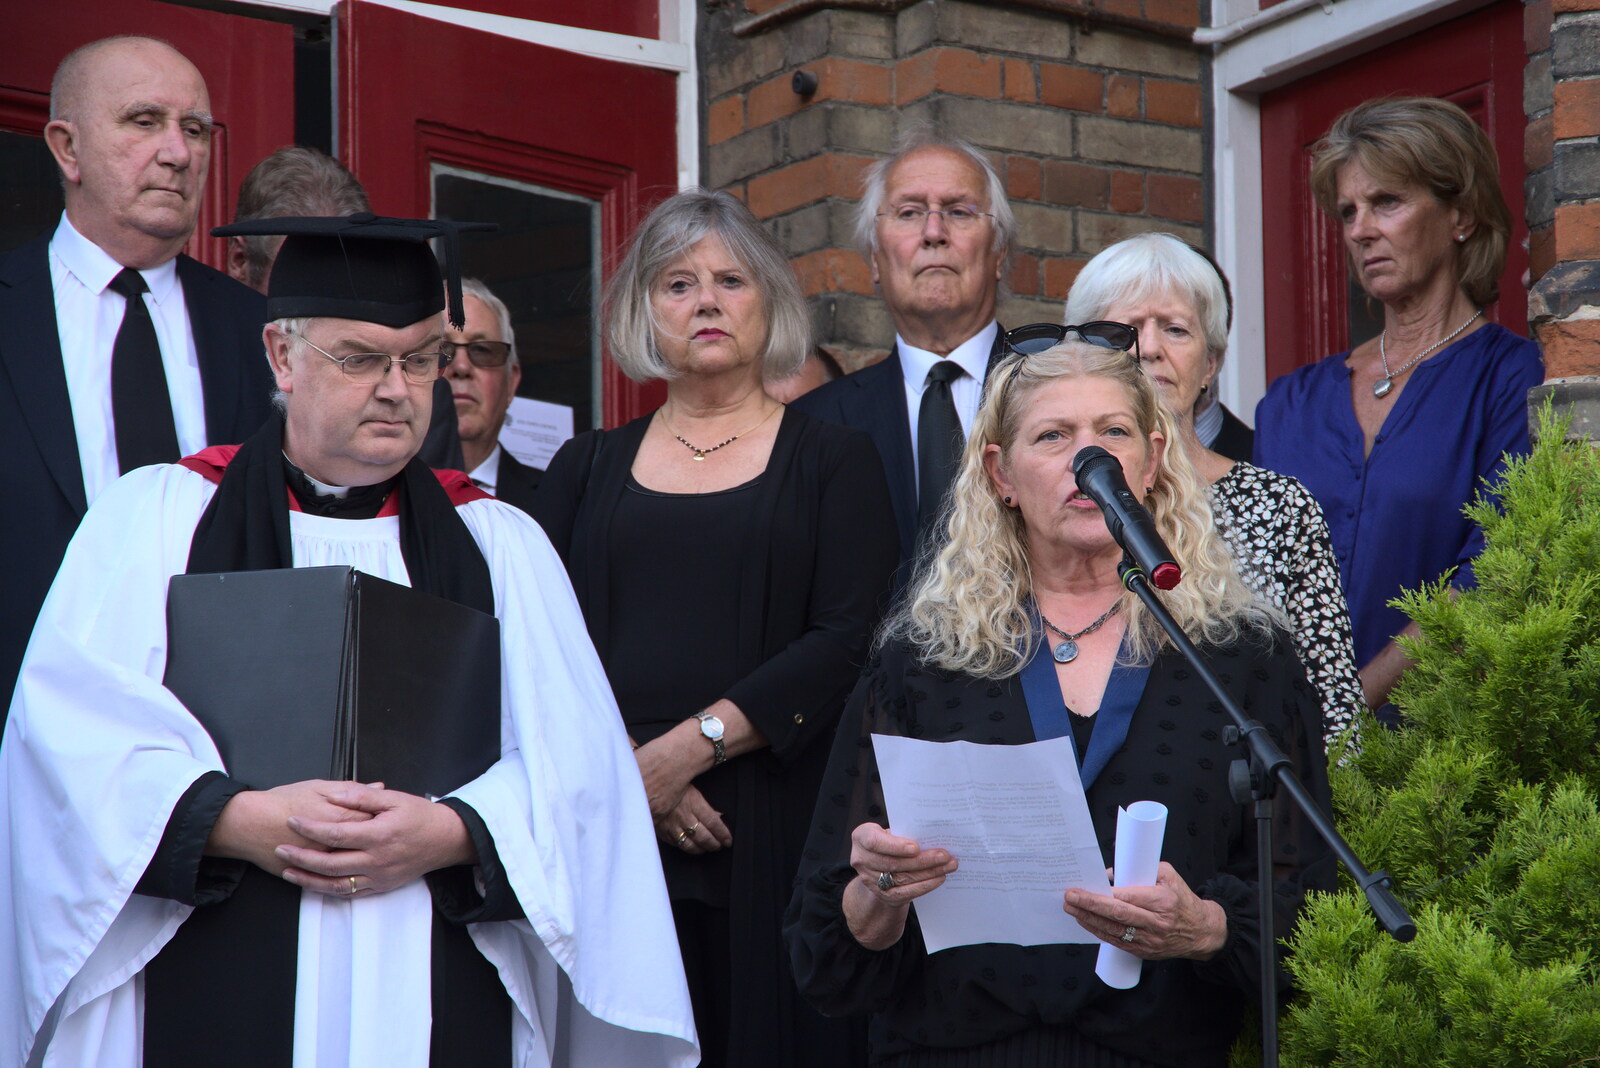 Italian Cars and a Royal Proclamation, Eye, Suffolk - 11th September 2022: The deputy mayor reads out a pre-amble speech